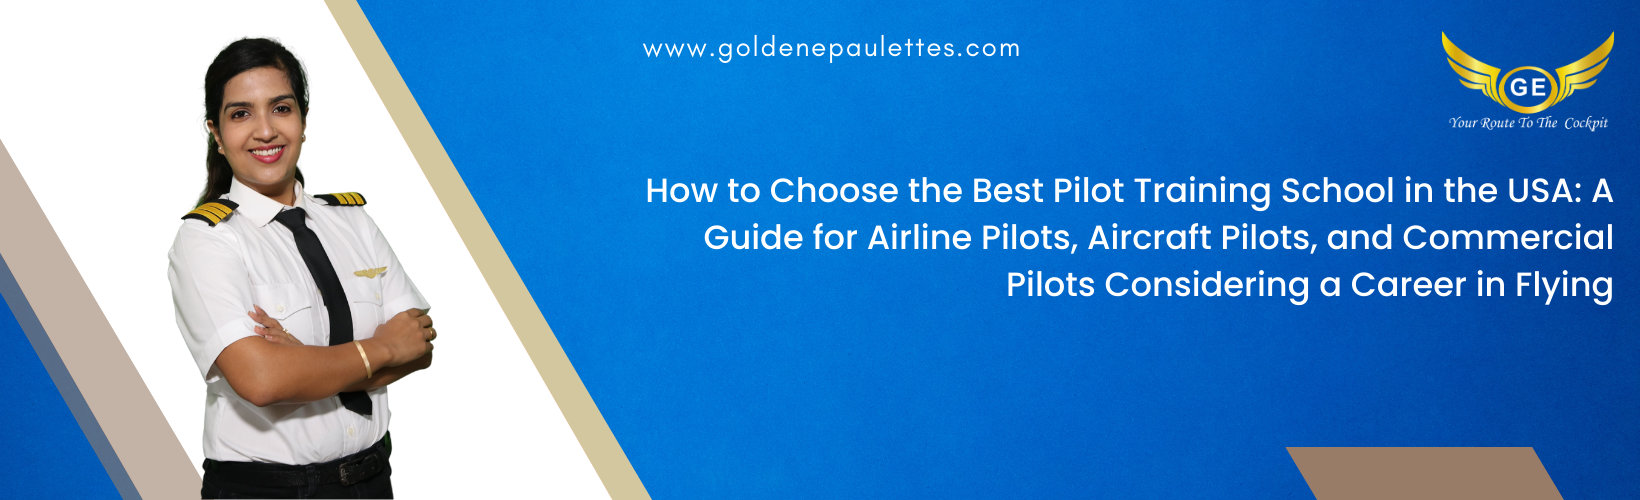 How to Choose the Best Pilot Training School in the USA